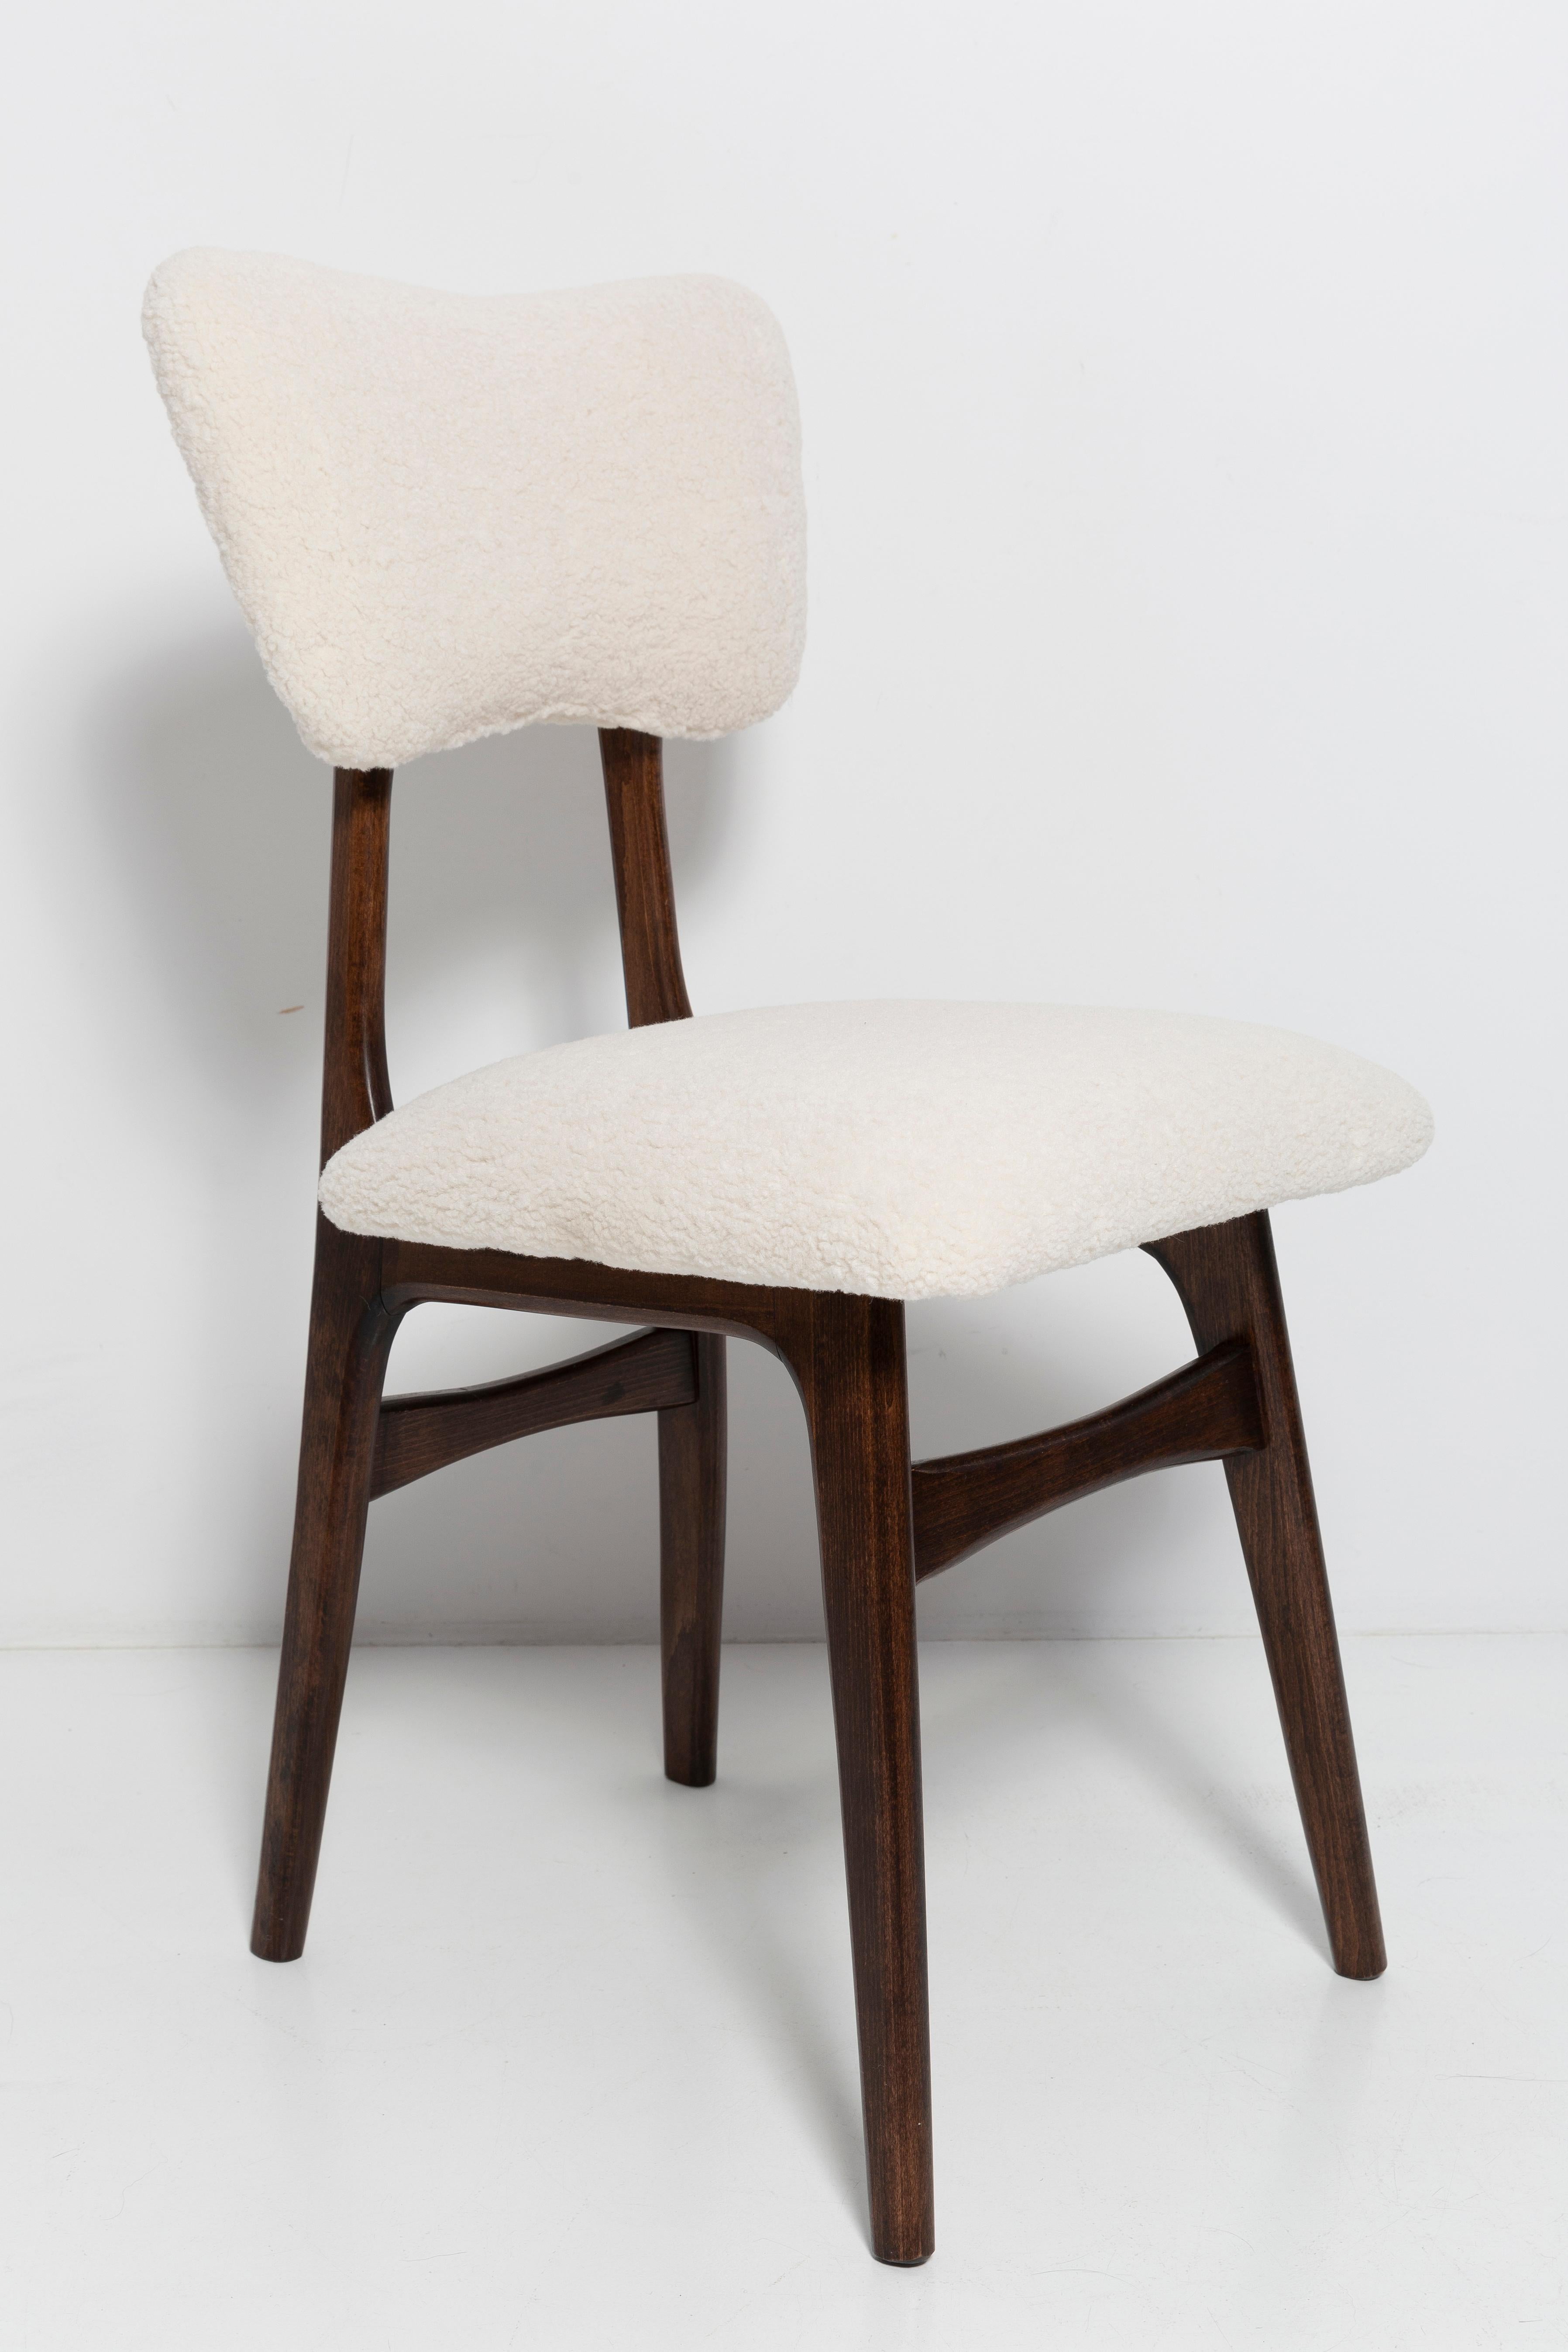 Mid-Century Modern 20th Century Light Crème Boucle Walnut Wood Butterfly Chair, Europe, 1960. For Sale